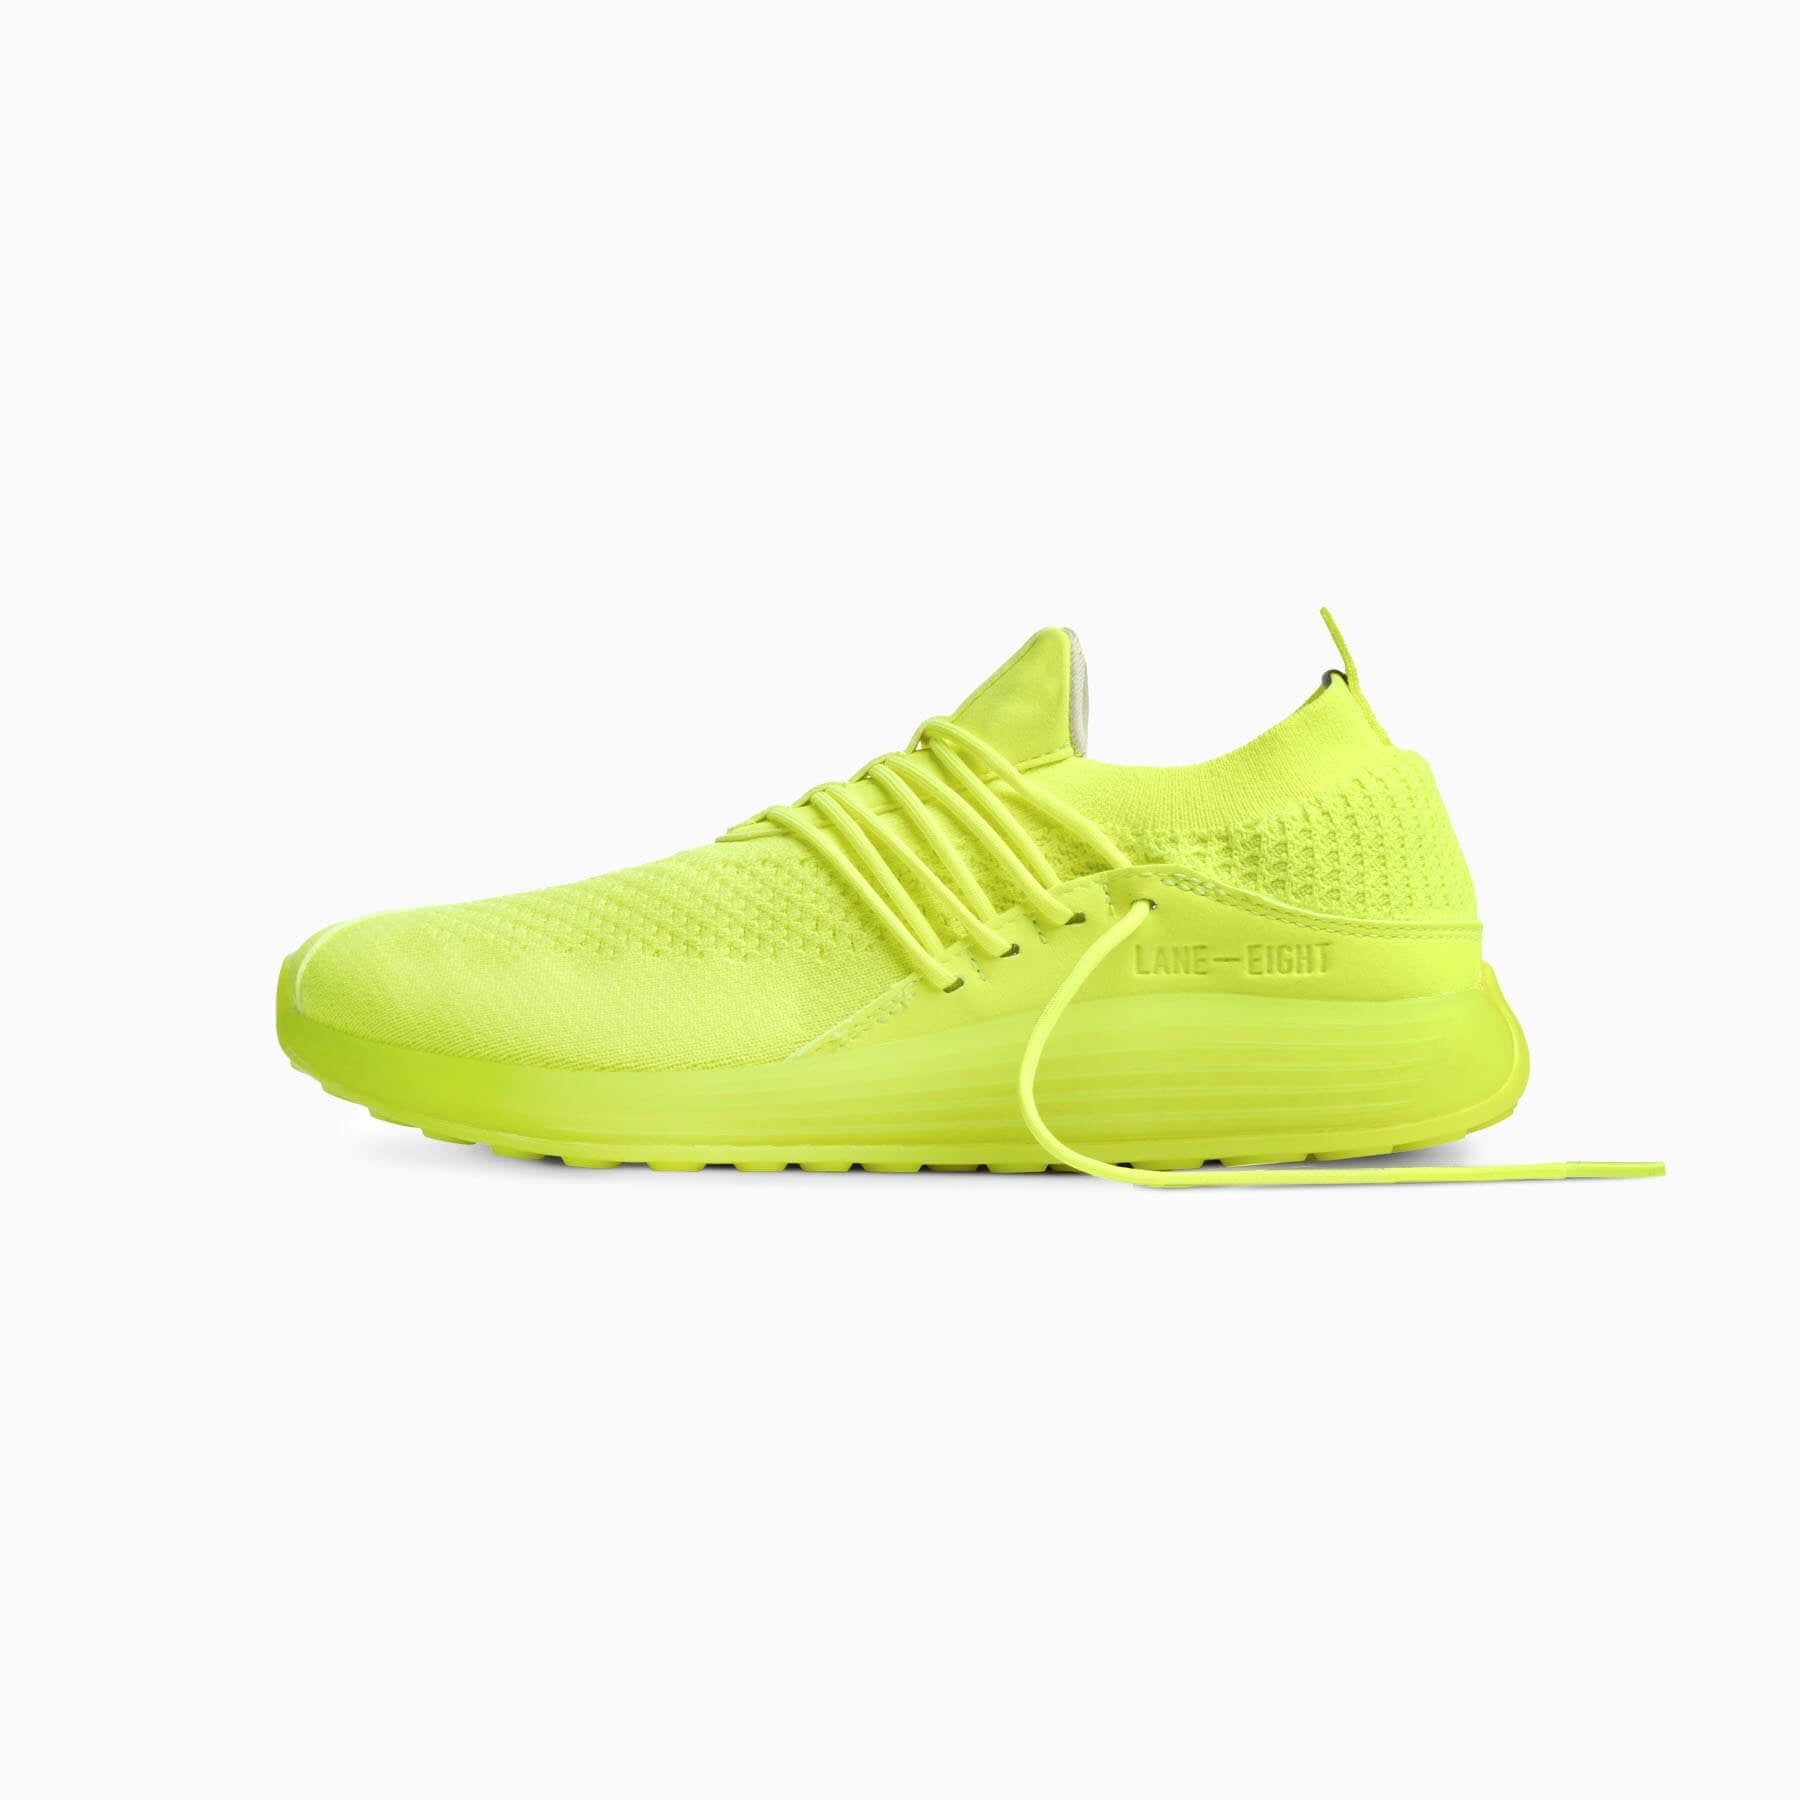 Lane Eight Women Lace Up Trainer AD 1 Sport Shoes Green Mesh Synthetic sole